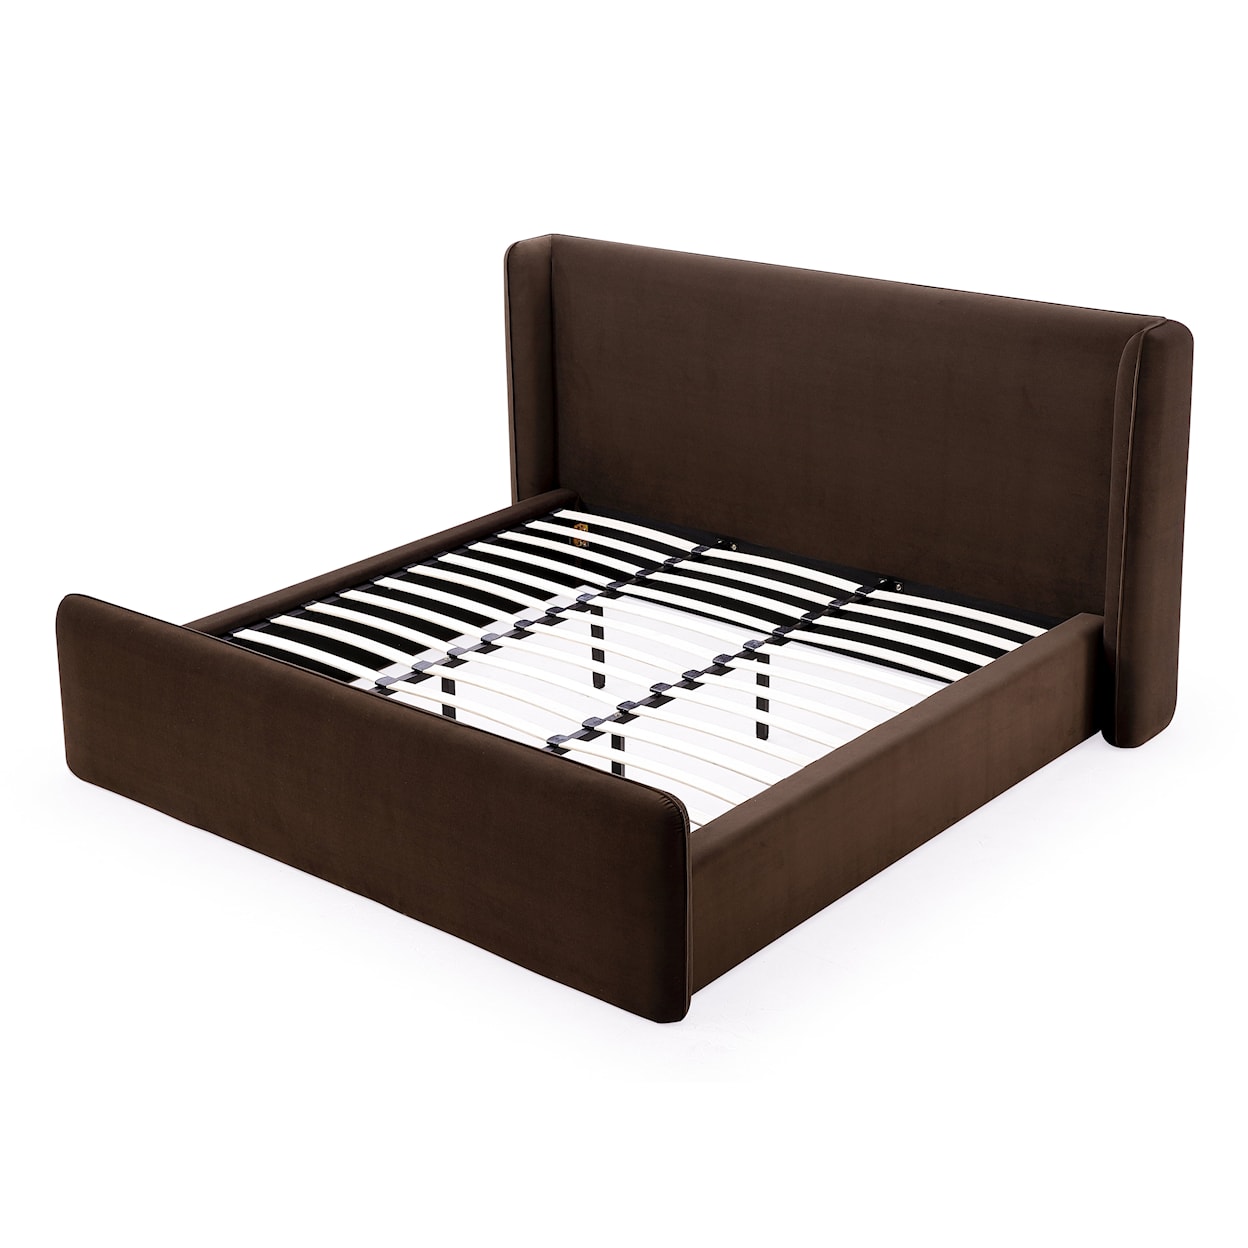 Modus International Formosa Bacall Upholstered King Bed